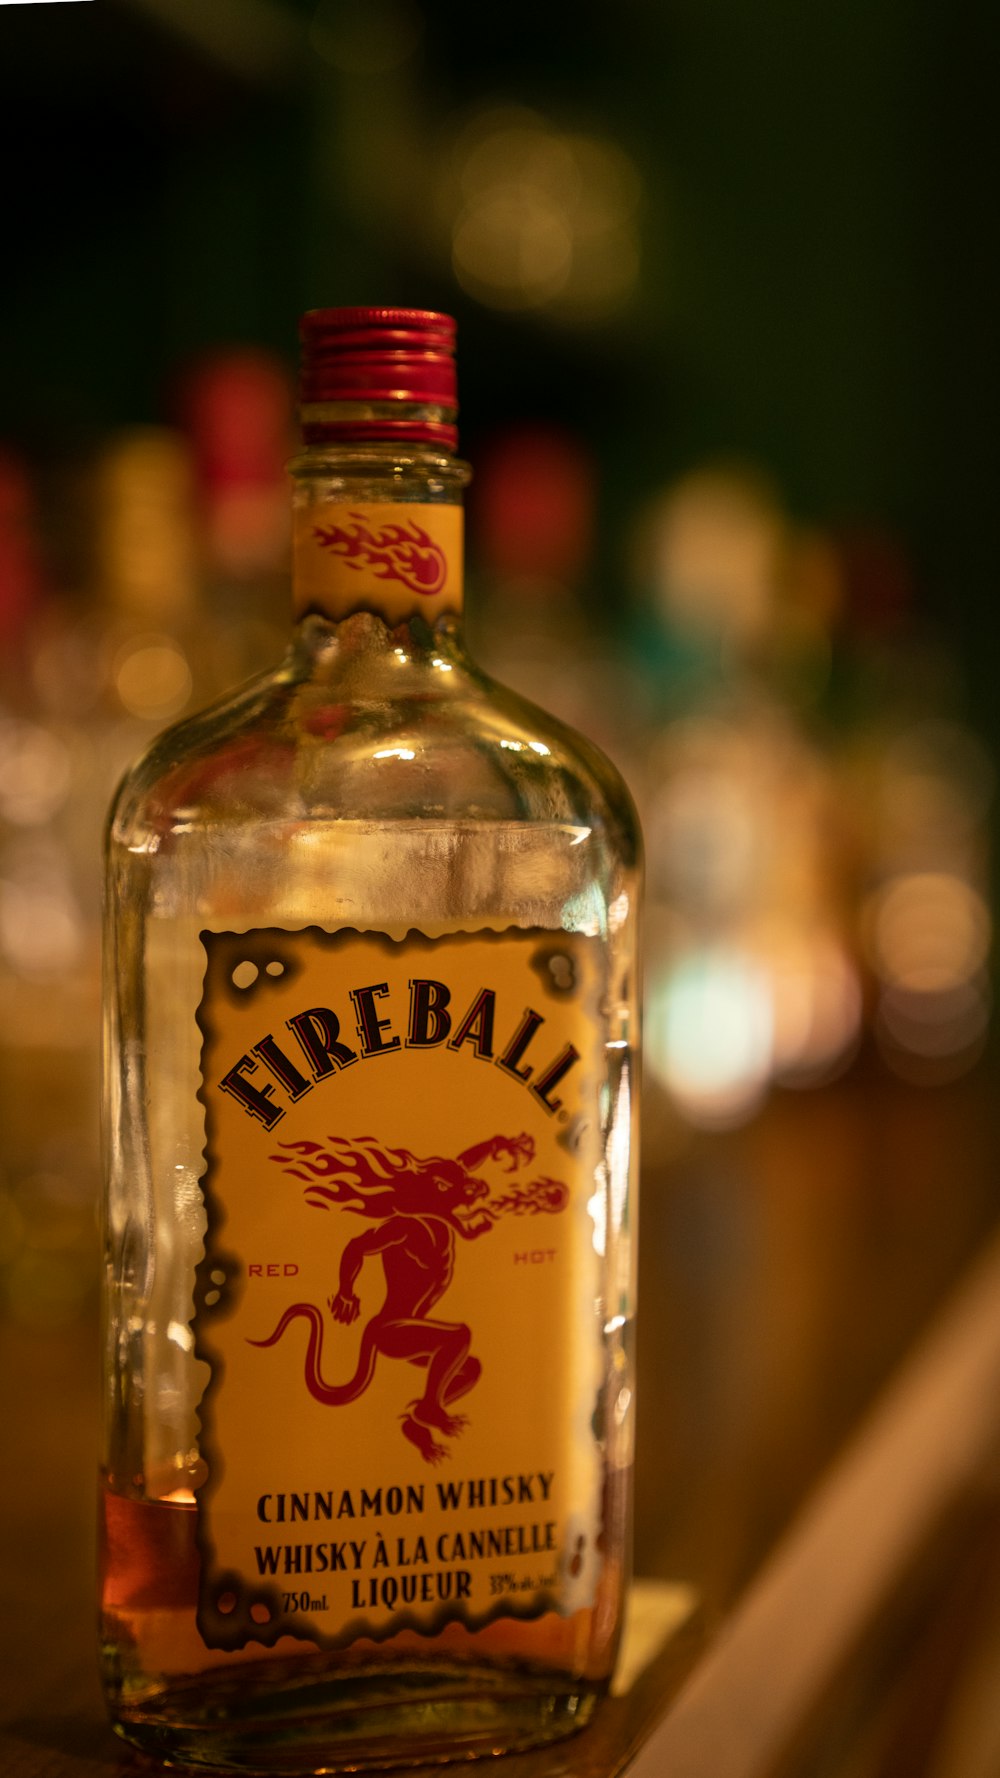 a bottle of fireball gin on a table